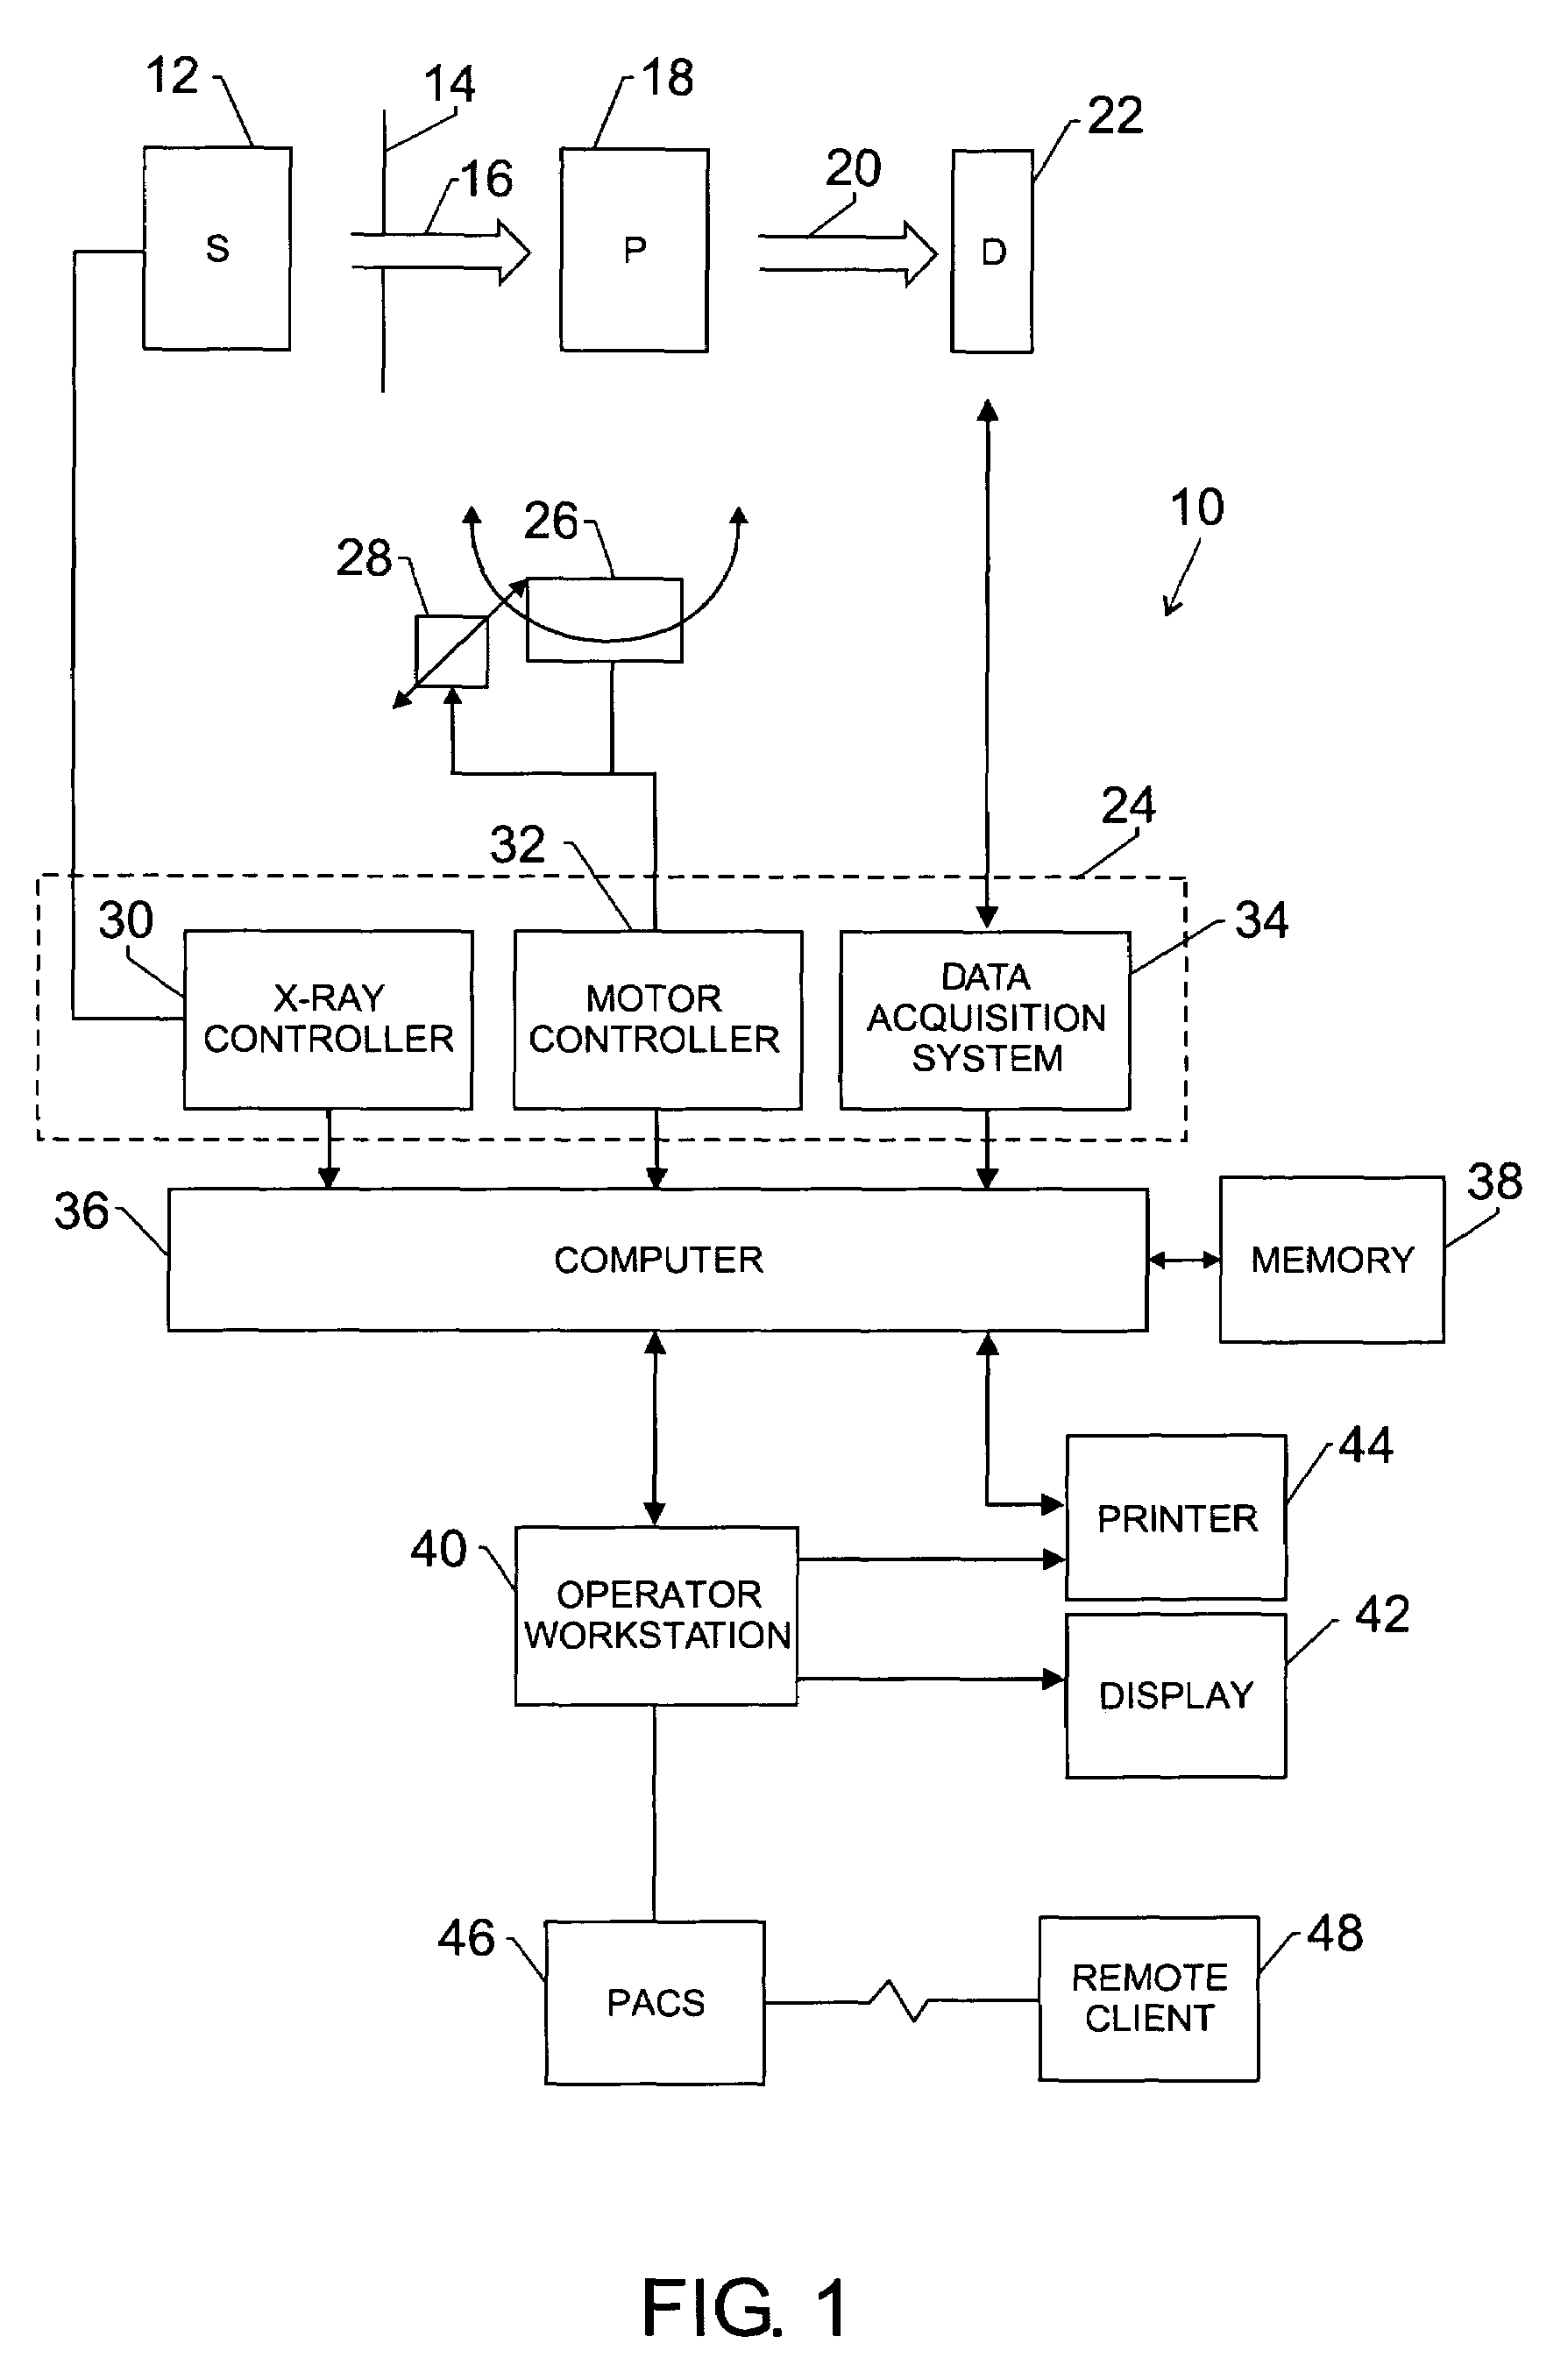 Method and system for imaging using multiple offset X-ray emission points